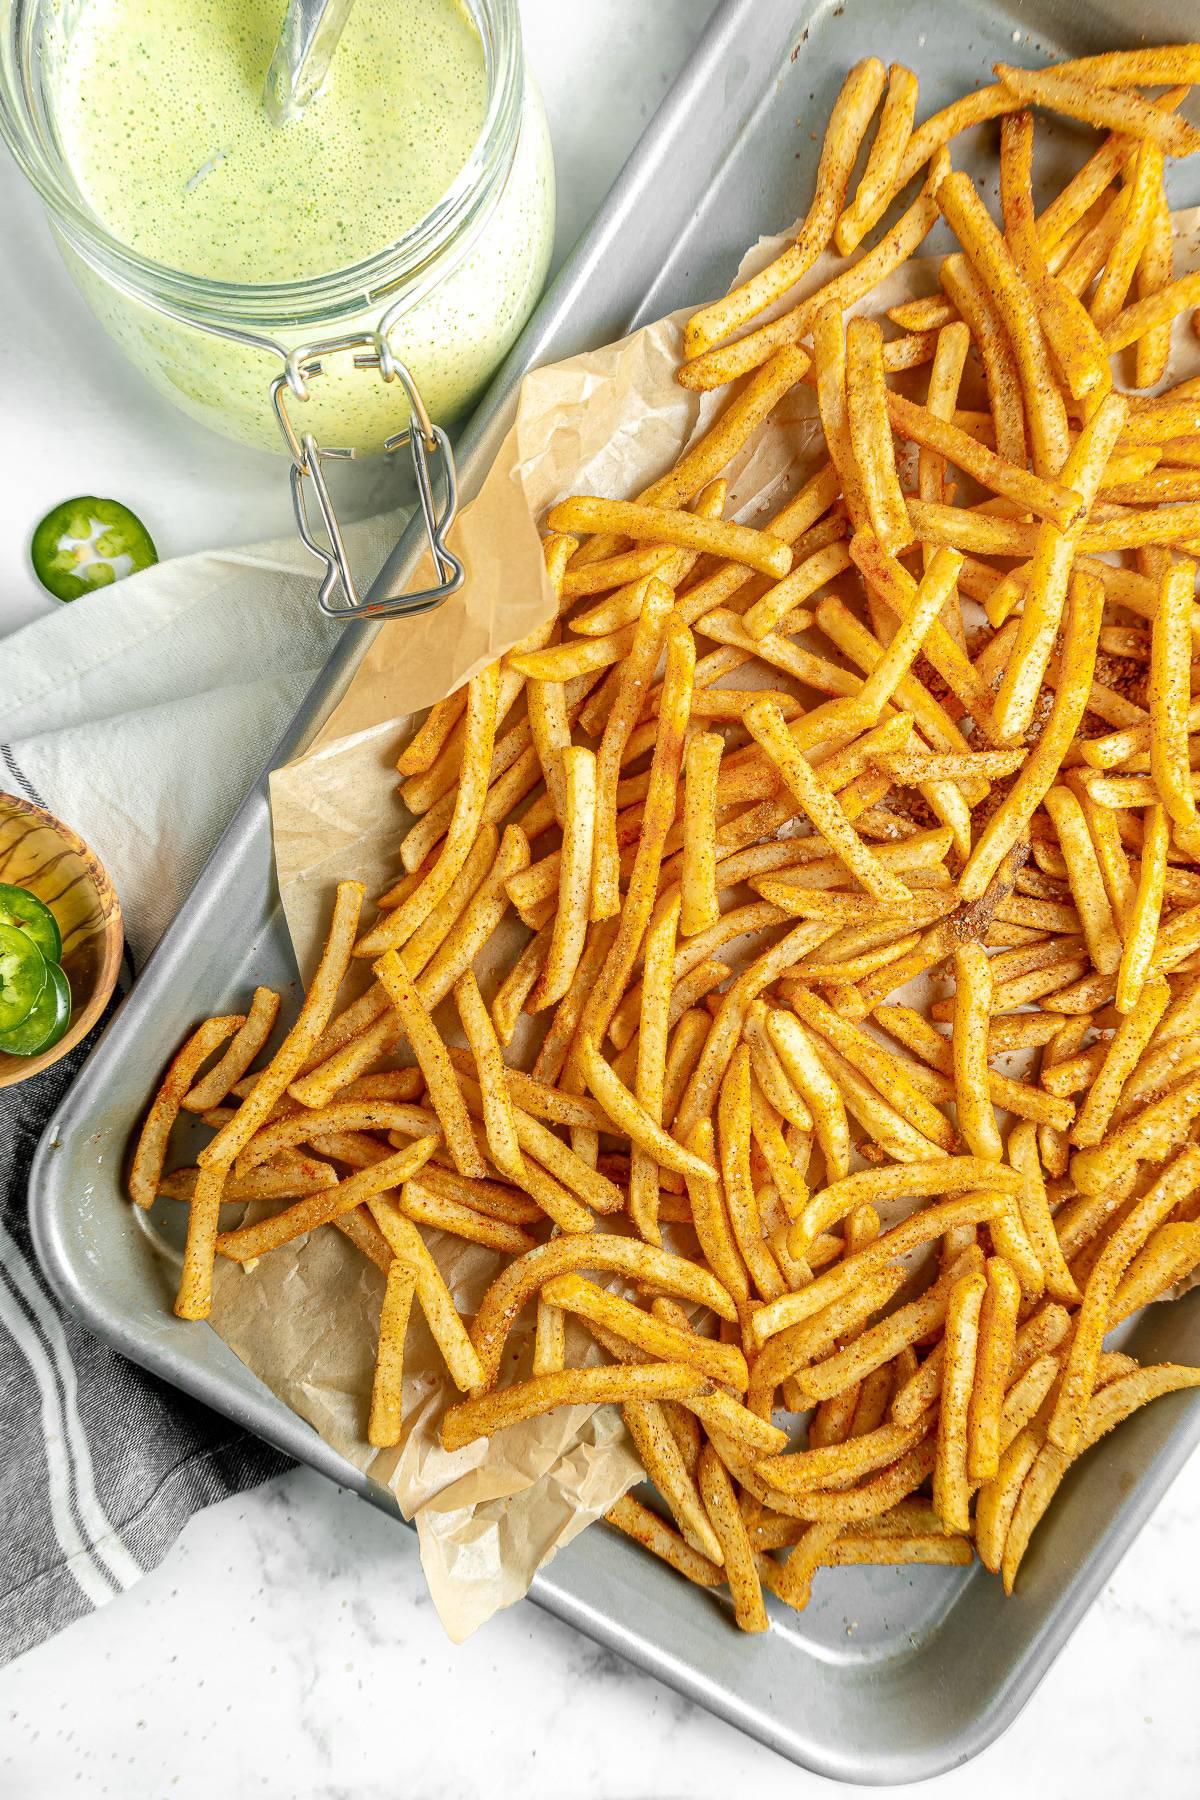 Masala fries on a sheet pan, with mint chutney on the side.